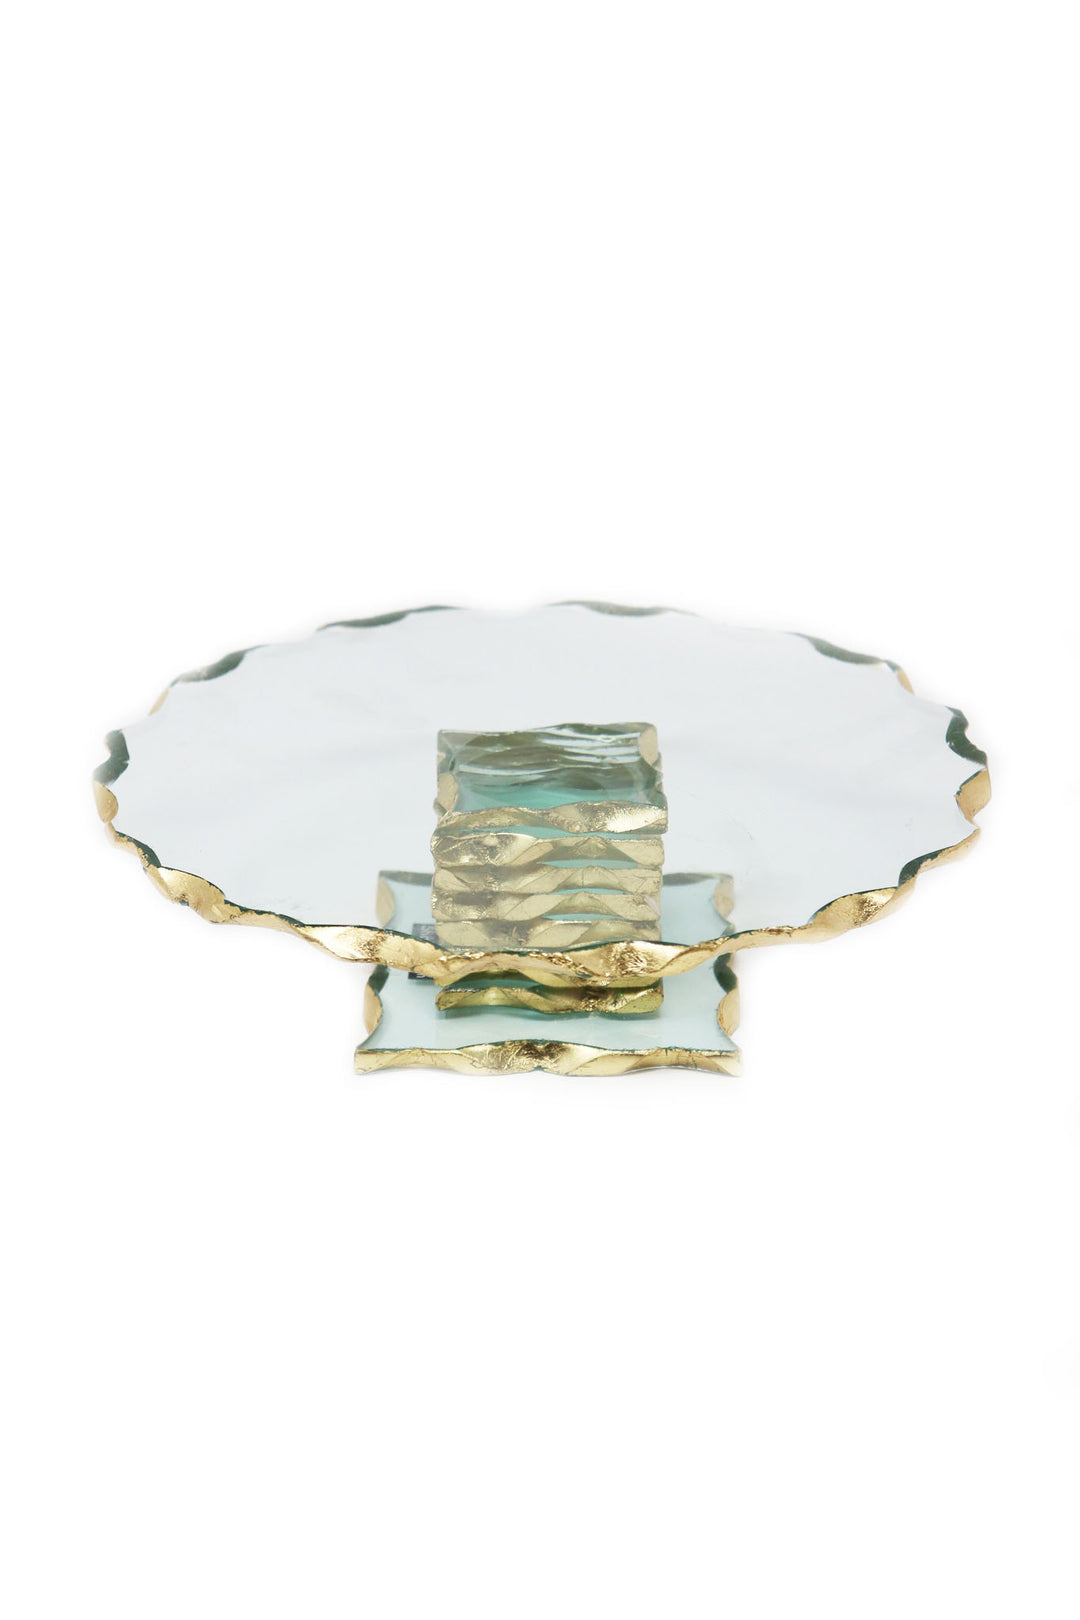 Chiseled Goldedge Handcrafted 9" Cake Stand - Gabrielle's Biloxi